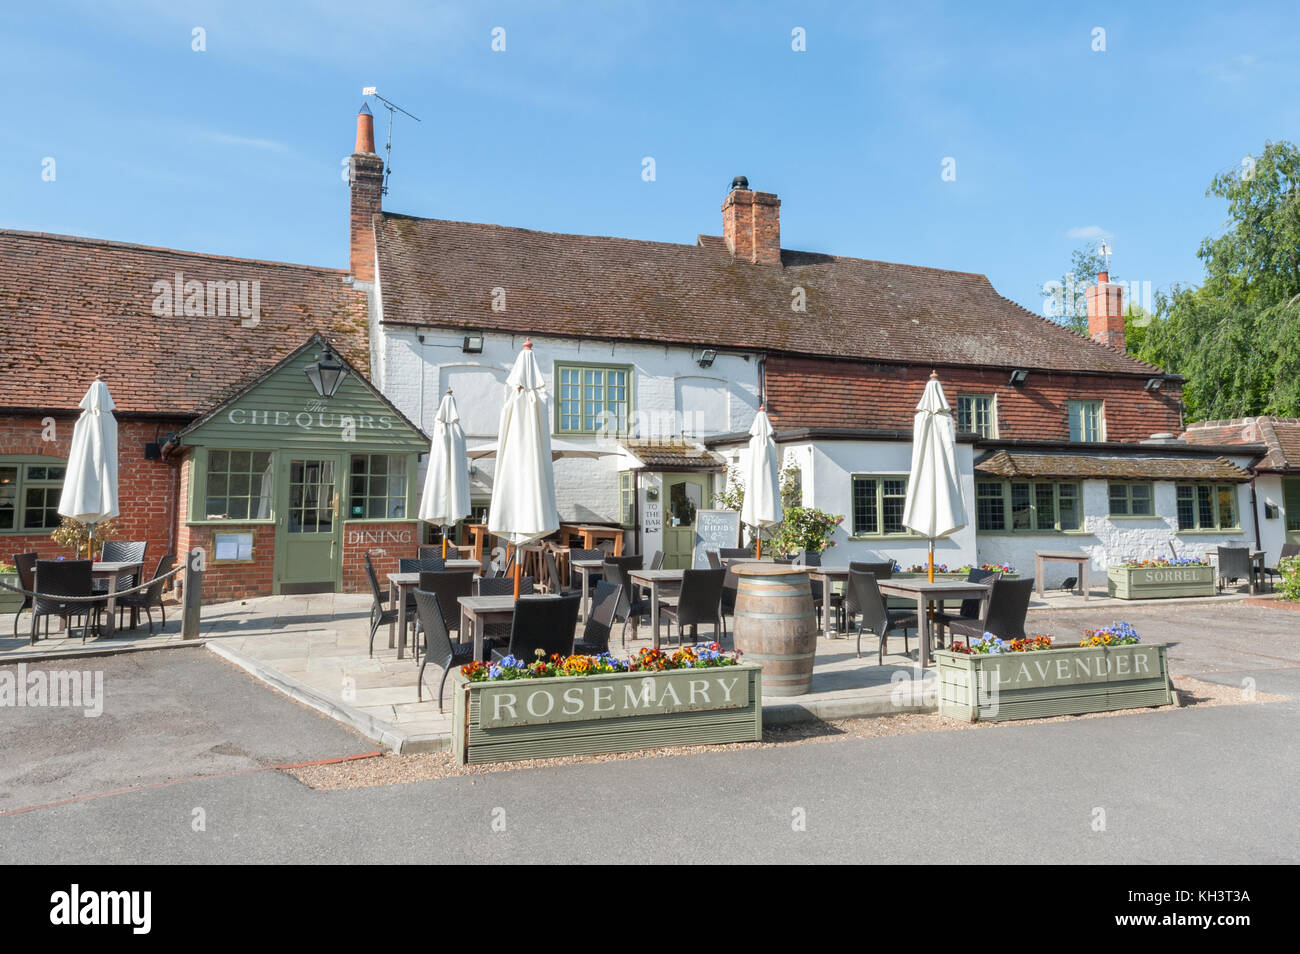 Eversley Cross, UK - May 10, 2017: The Chequers is an old traditional English pub dating back to the 17th century in the picturesque village of Eversl Stock Photo